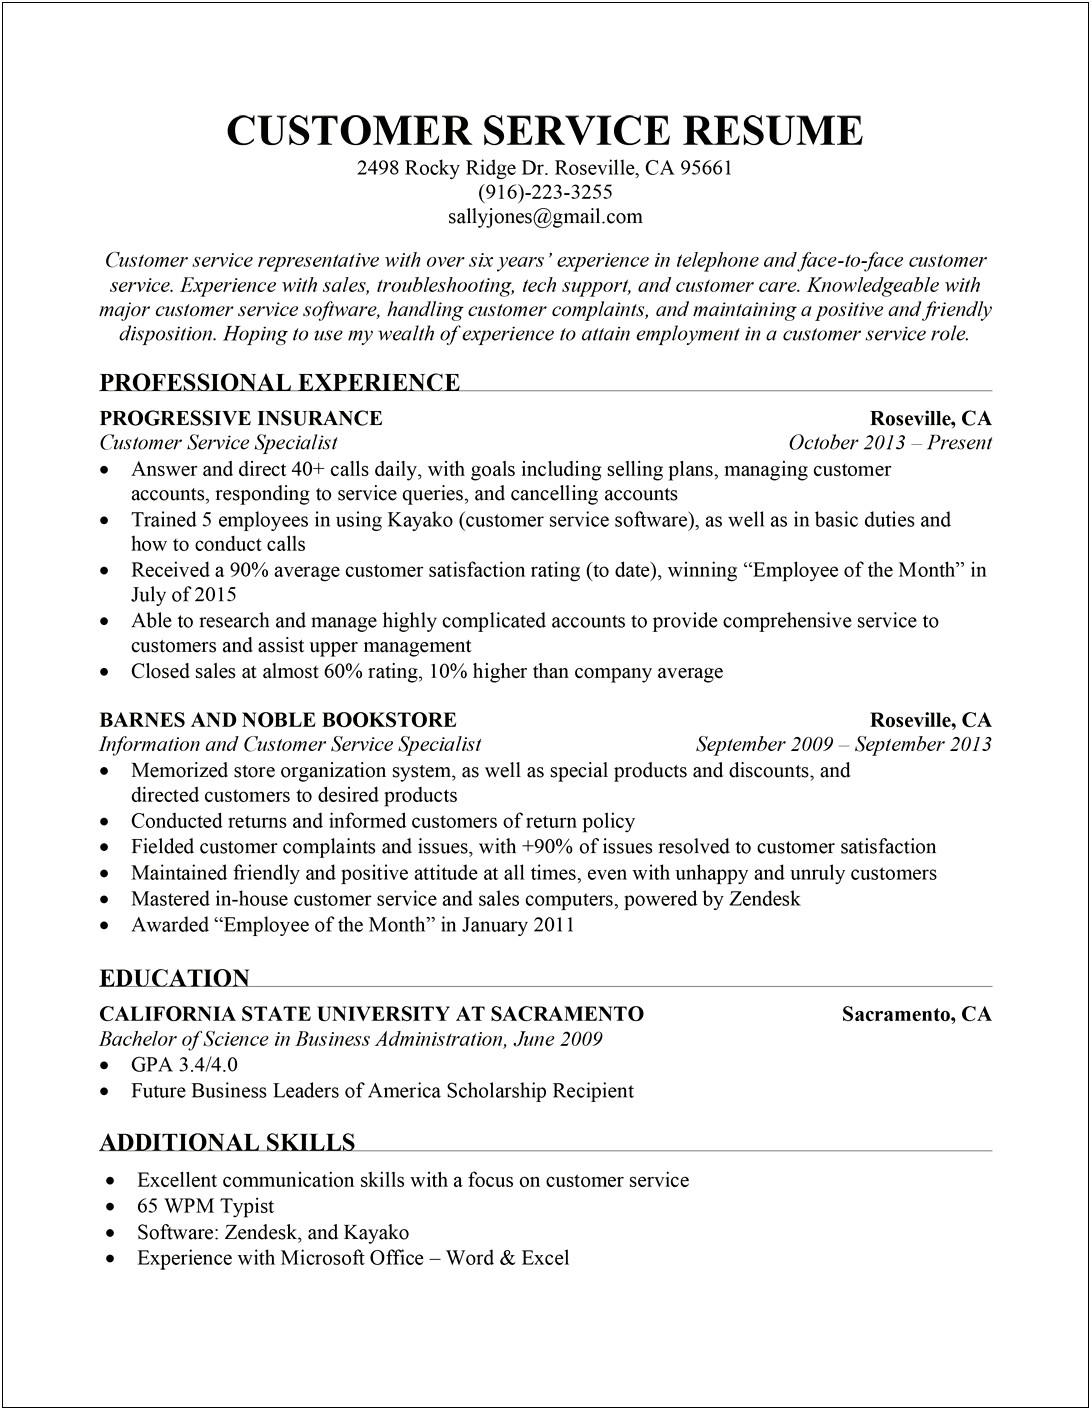 Positive Skills And Abilities For Resume